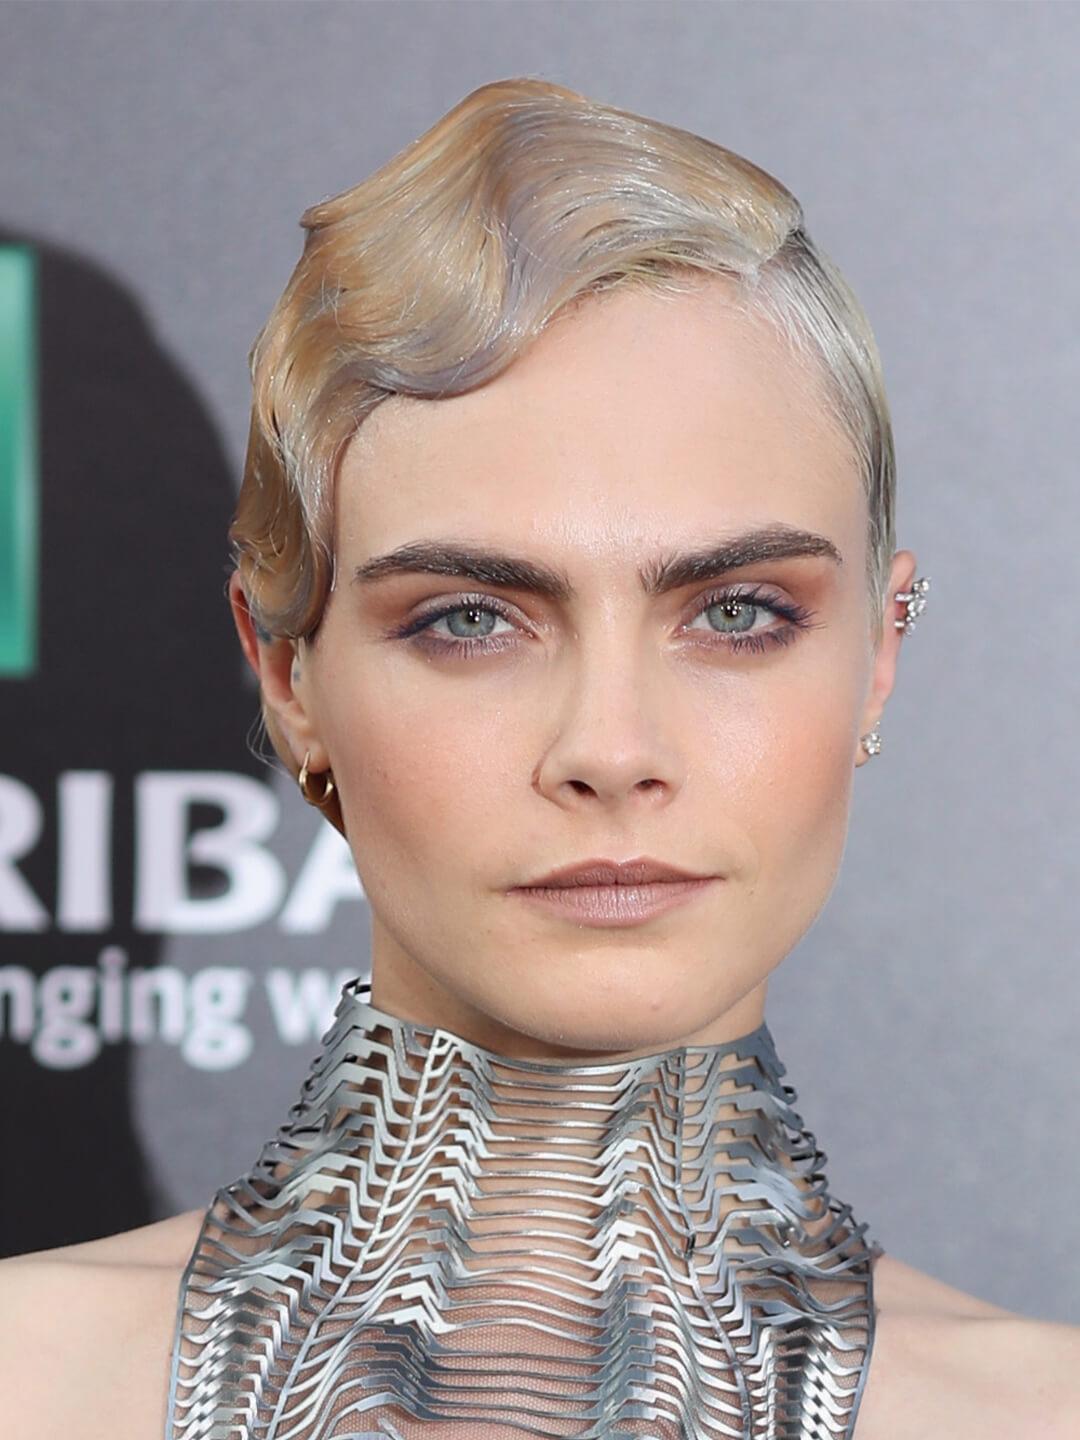 Cara Delevingne rocking a sleek and wavy short hairstyle and futuristic neck piece